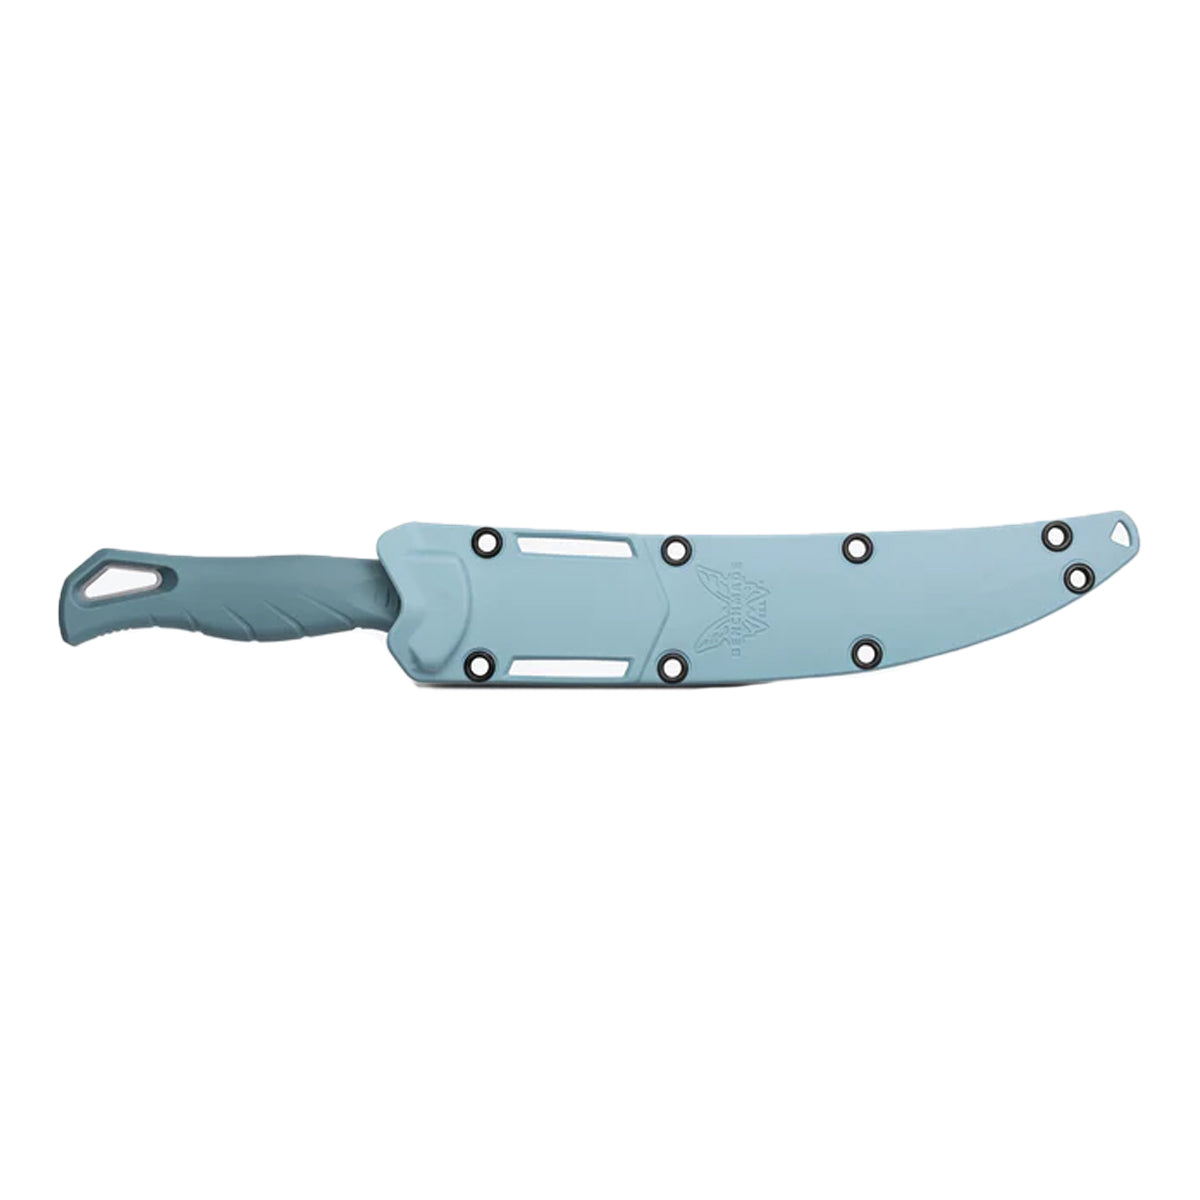 Benchmade Fishcrafter 18010 in  by GOHUNT | Benchmade - GOHUNT Shop